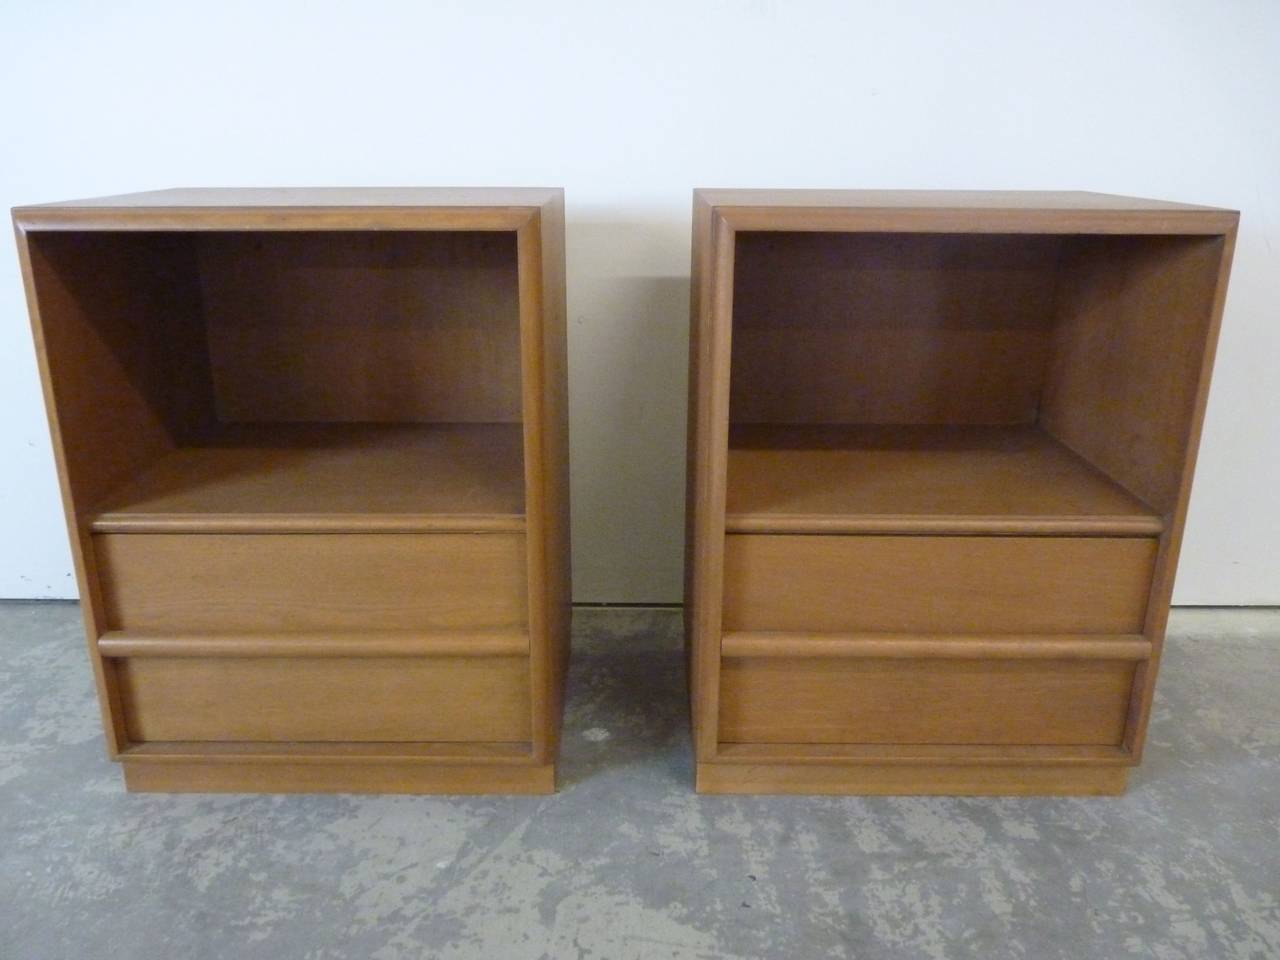 Pair of bleached walnut nightsands by Robsjohn-Gibbings for Widdicomb, circa 1953. Pair is in original finish and present very well. Can be refinished in the hue of your choice for a small fee.
Please also see our other listings for matching